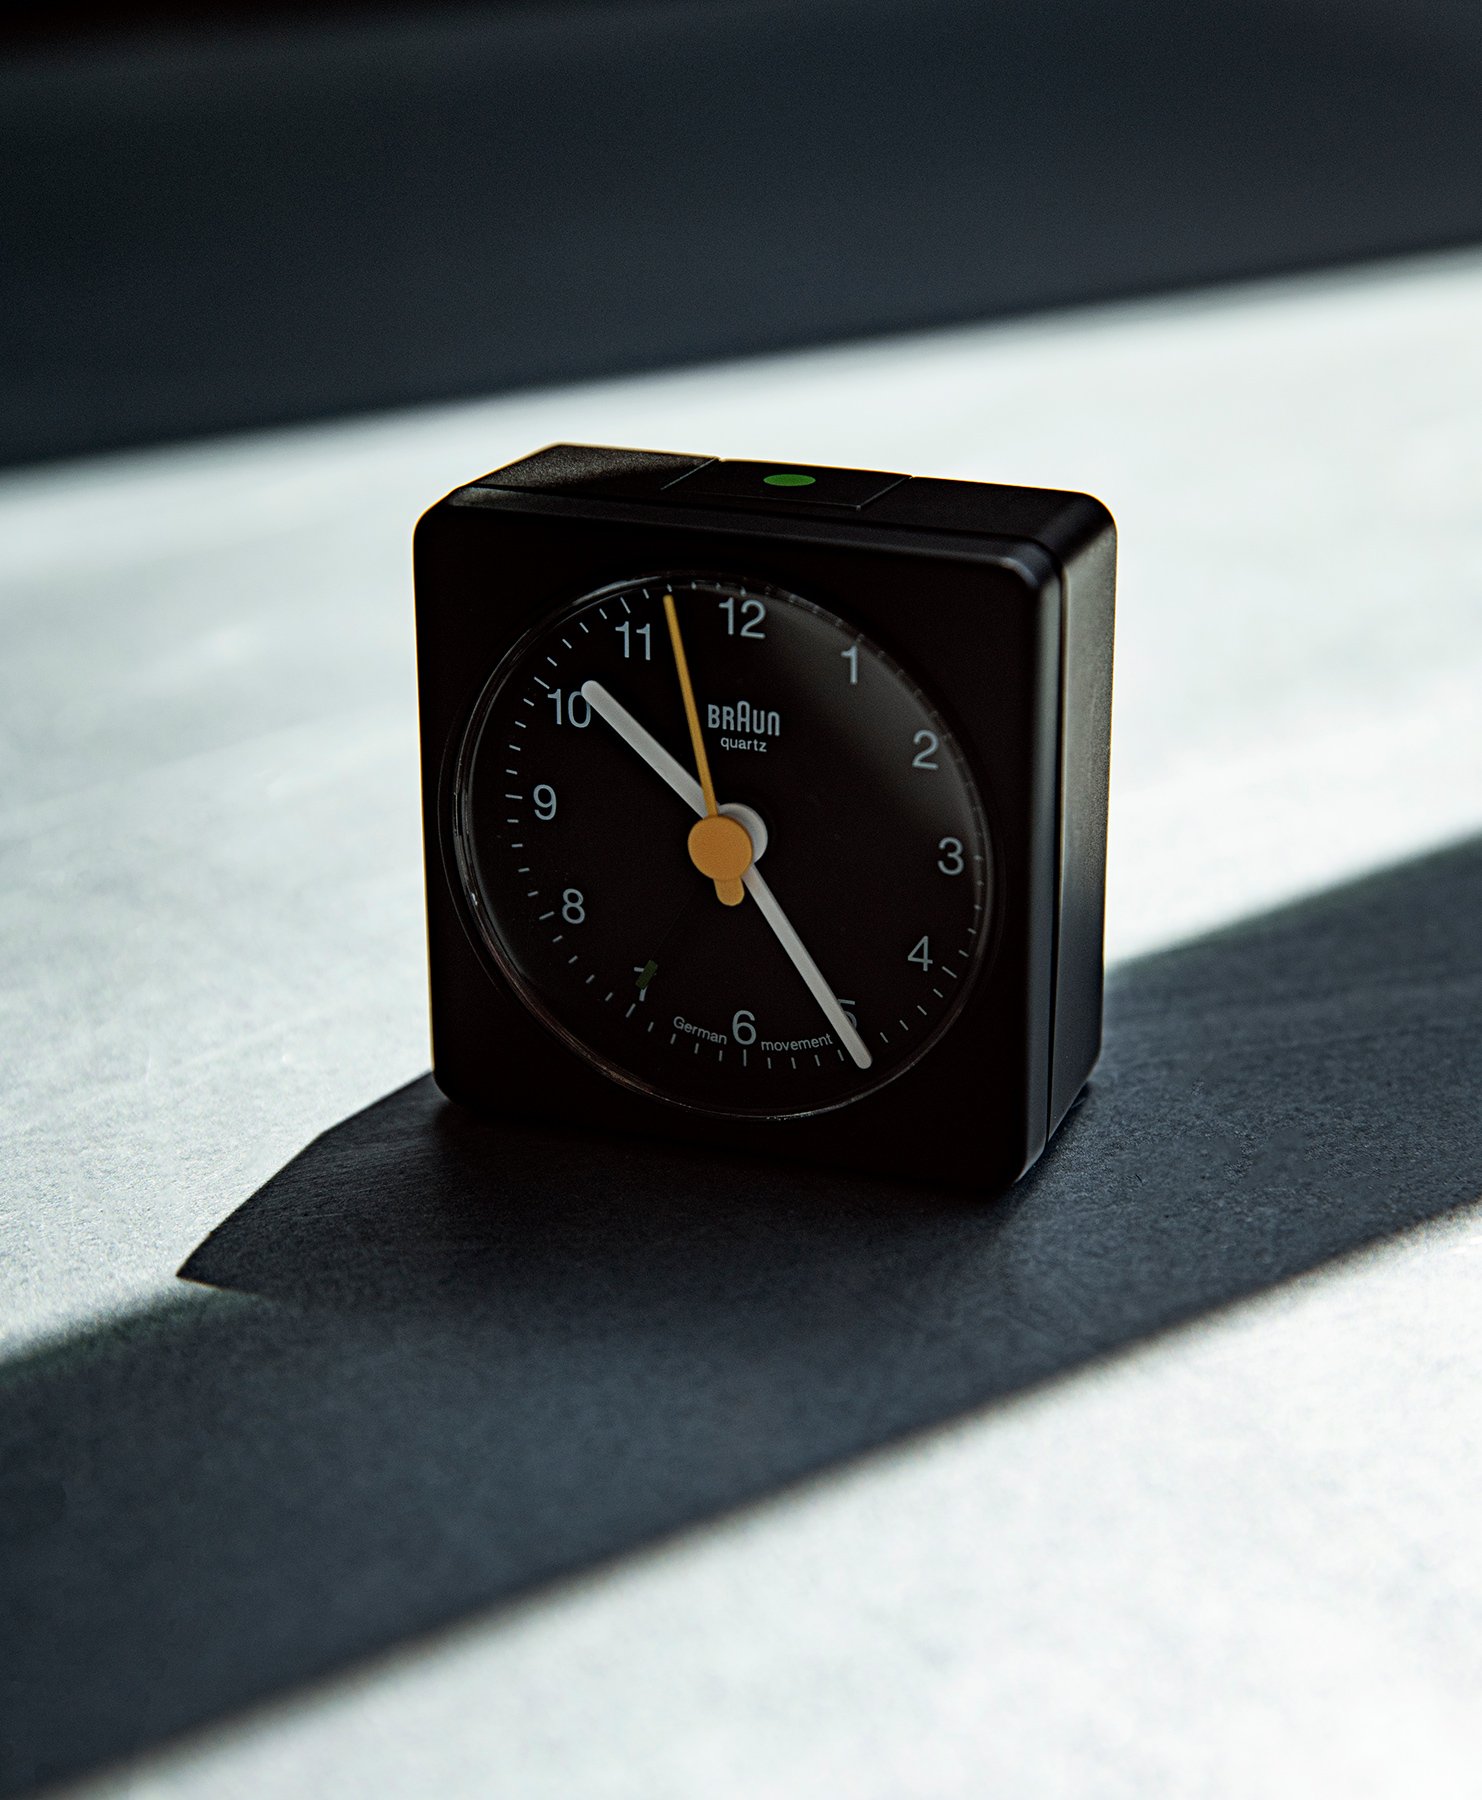 Clock by Dieter Rams & Lubs - Journal - Article